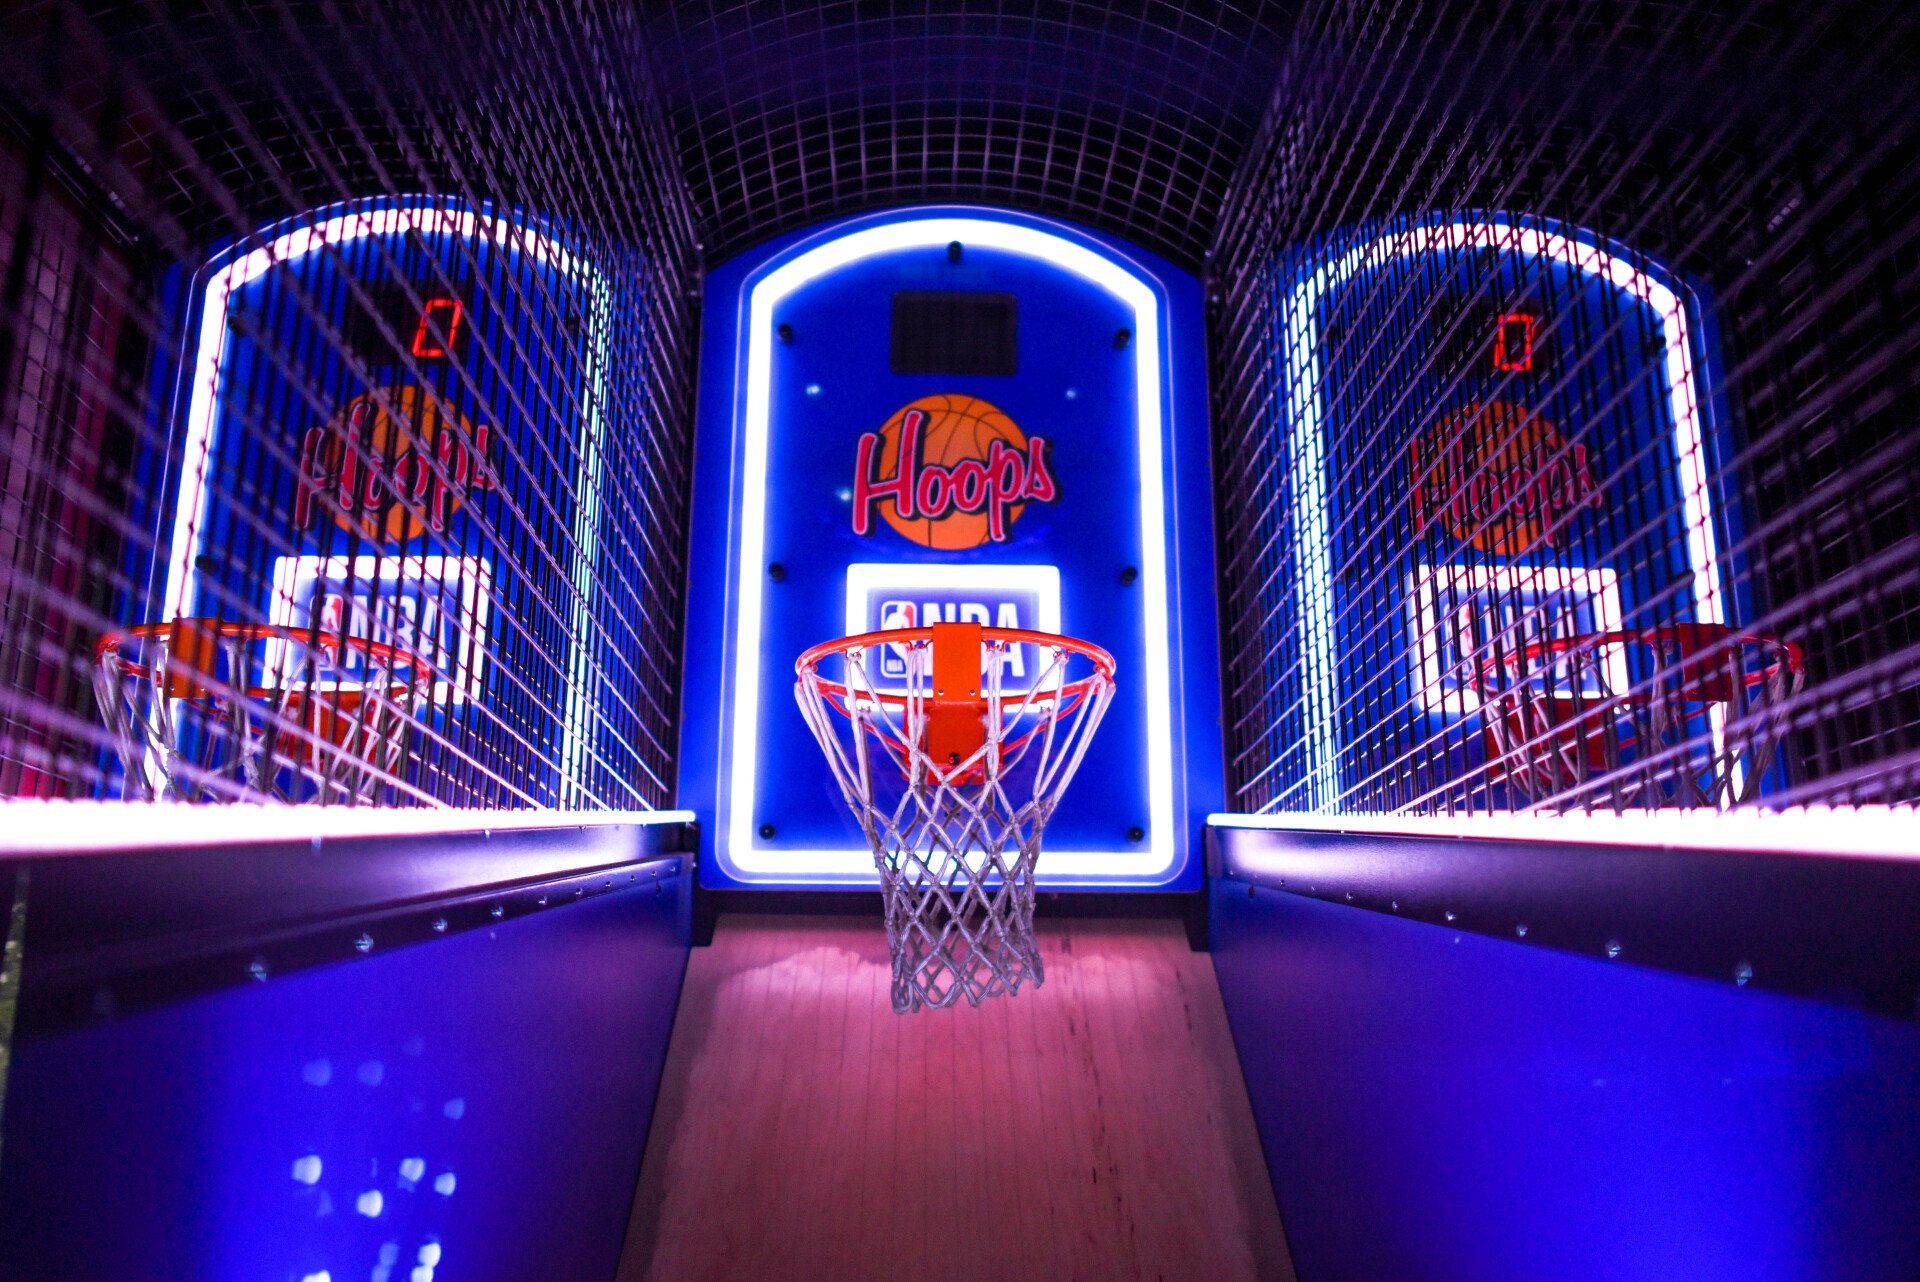 electric basketball hoops at an arcade